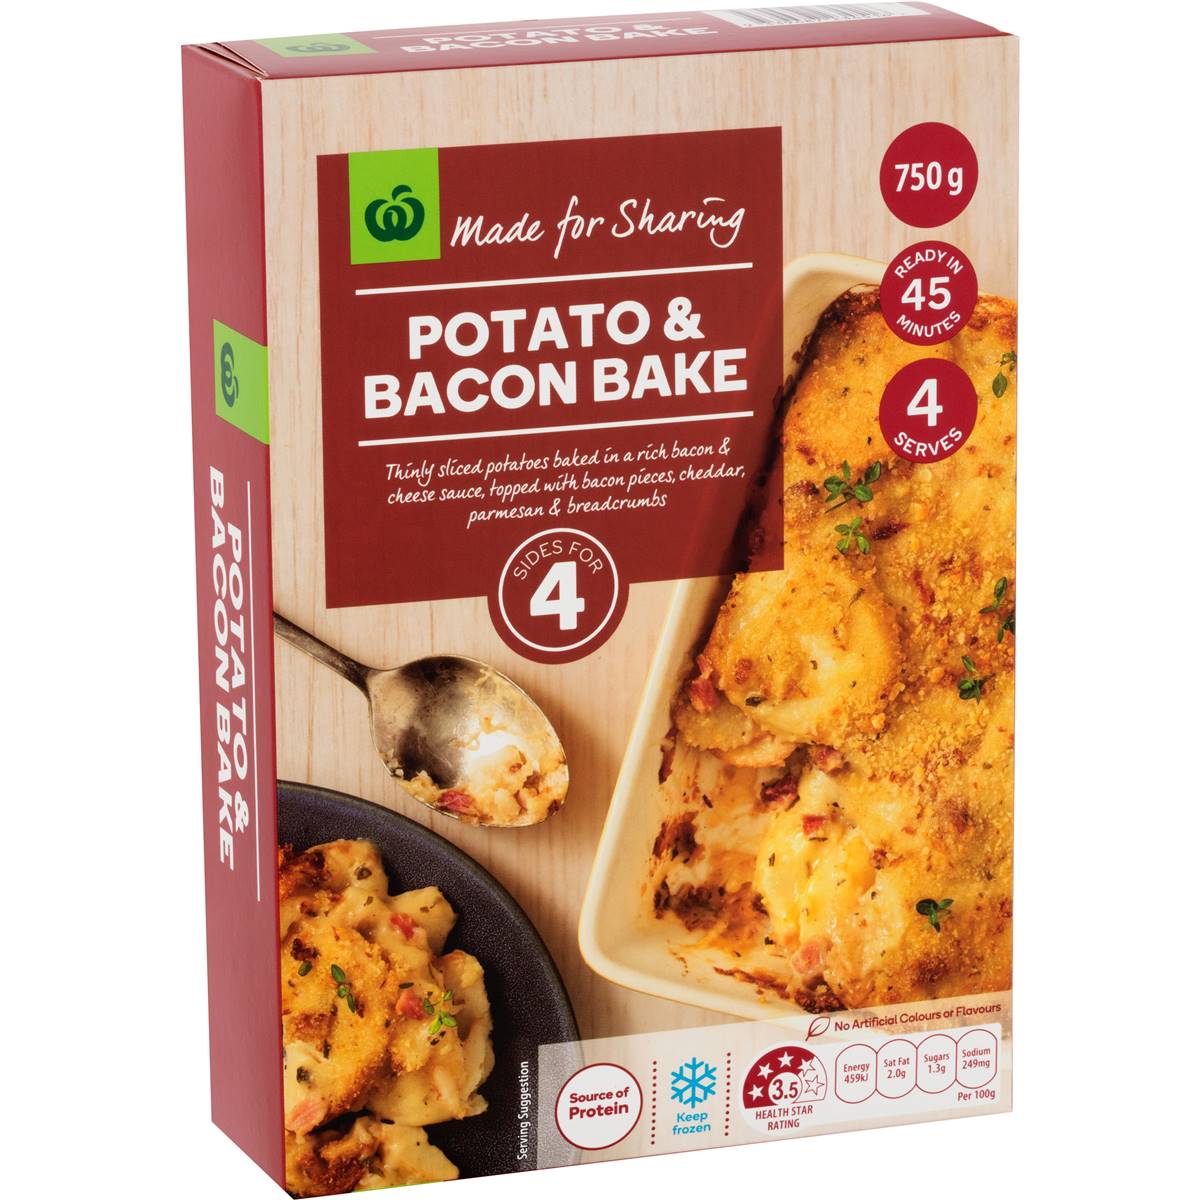 Calories in Woolworths Potato & Bacon Bake